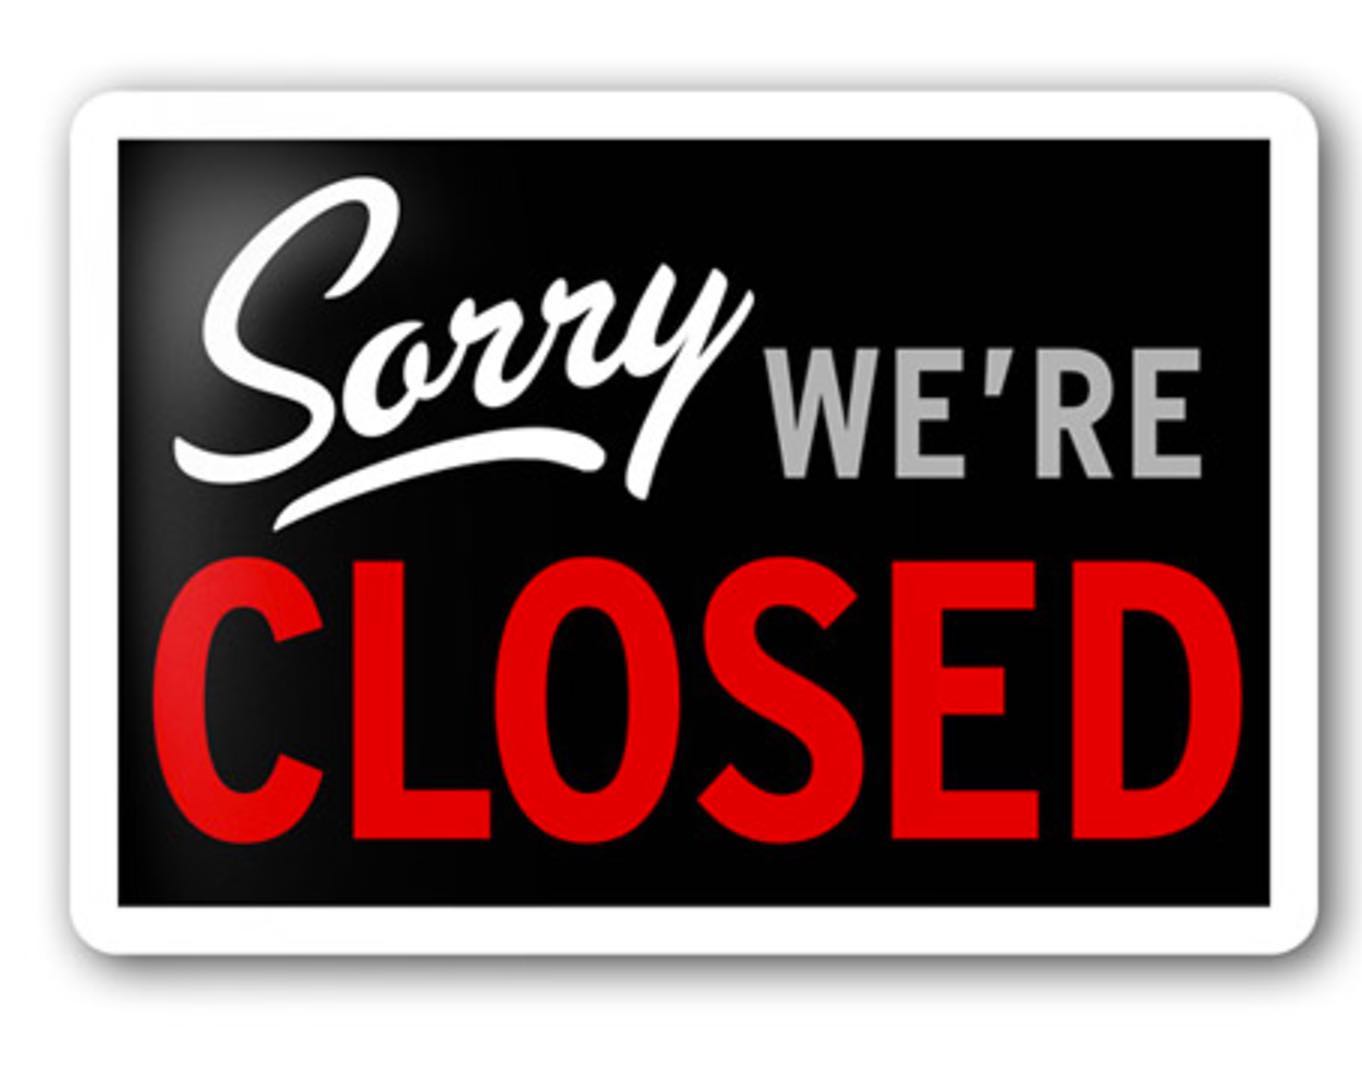 FYI: TOMORROW Friday, July 21 the shop will be closed! Sorry for any inconvenience, please DM if you have any questions!